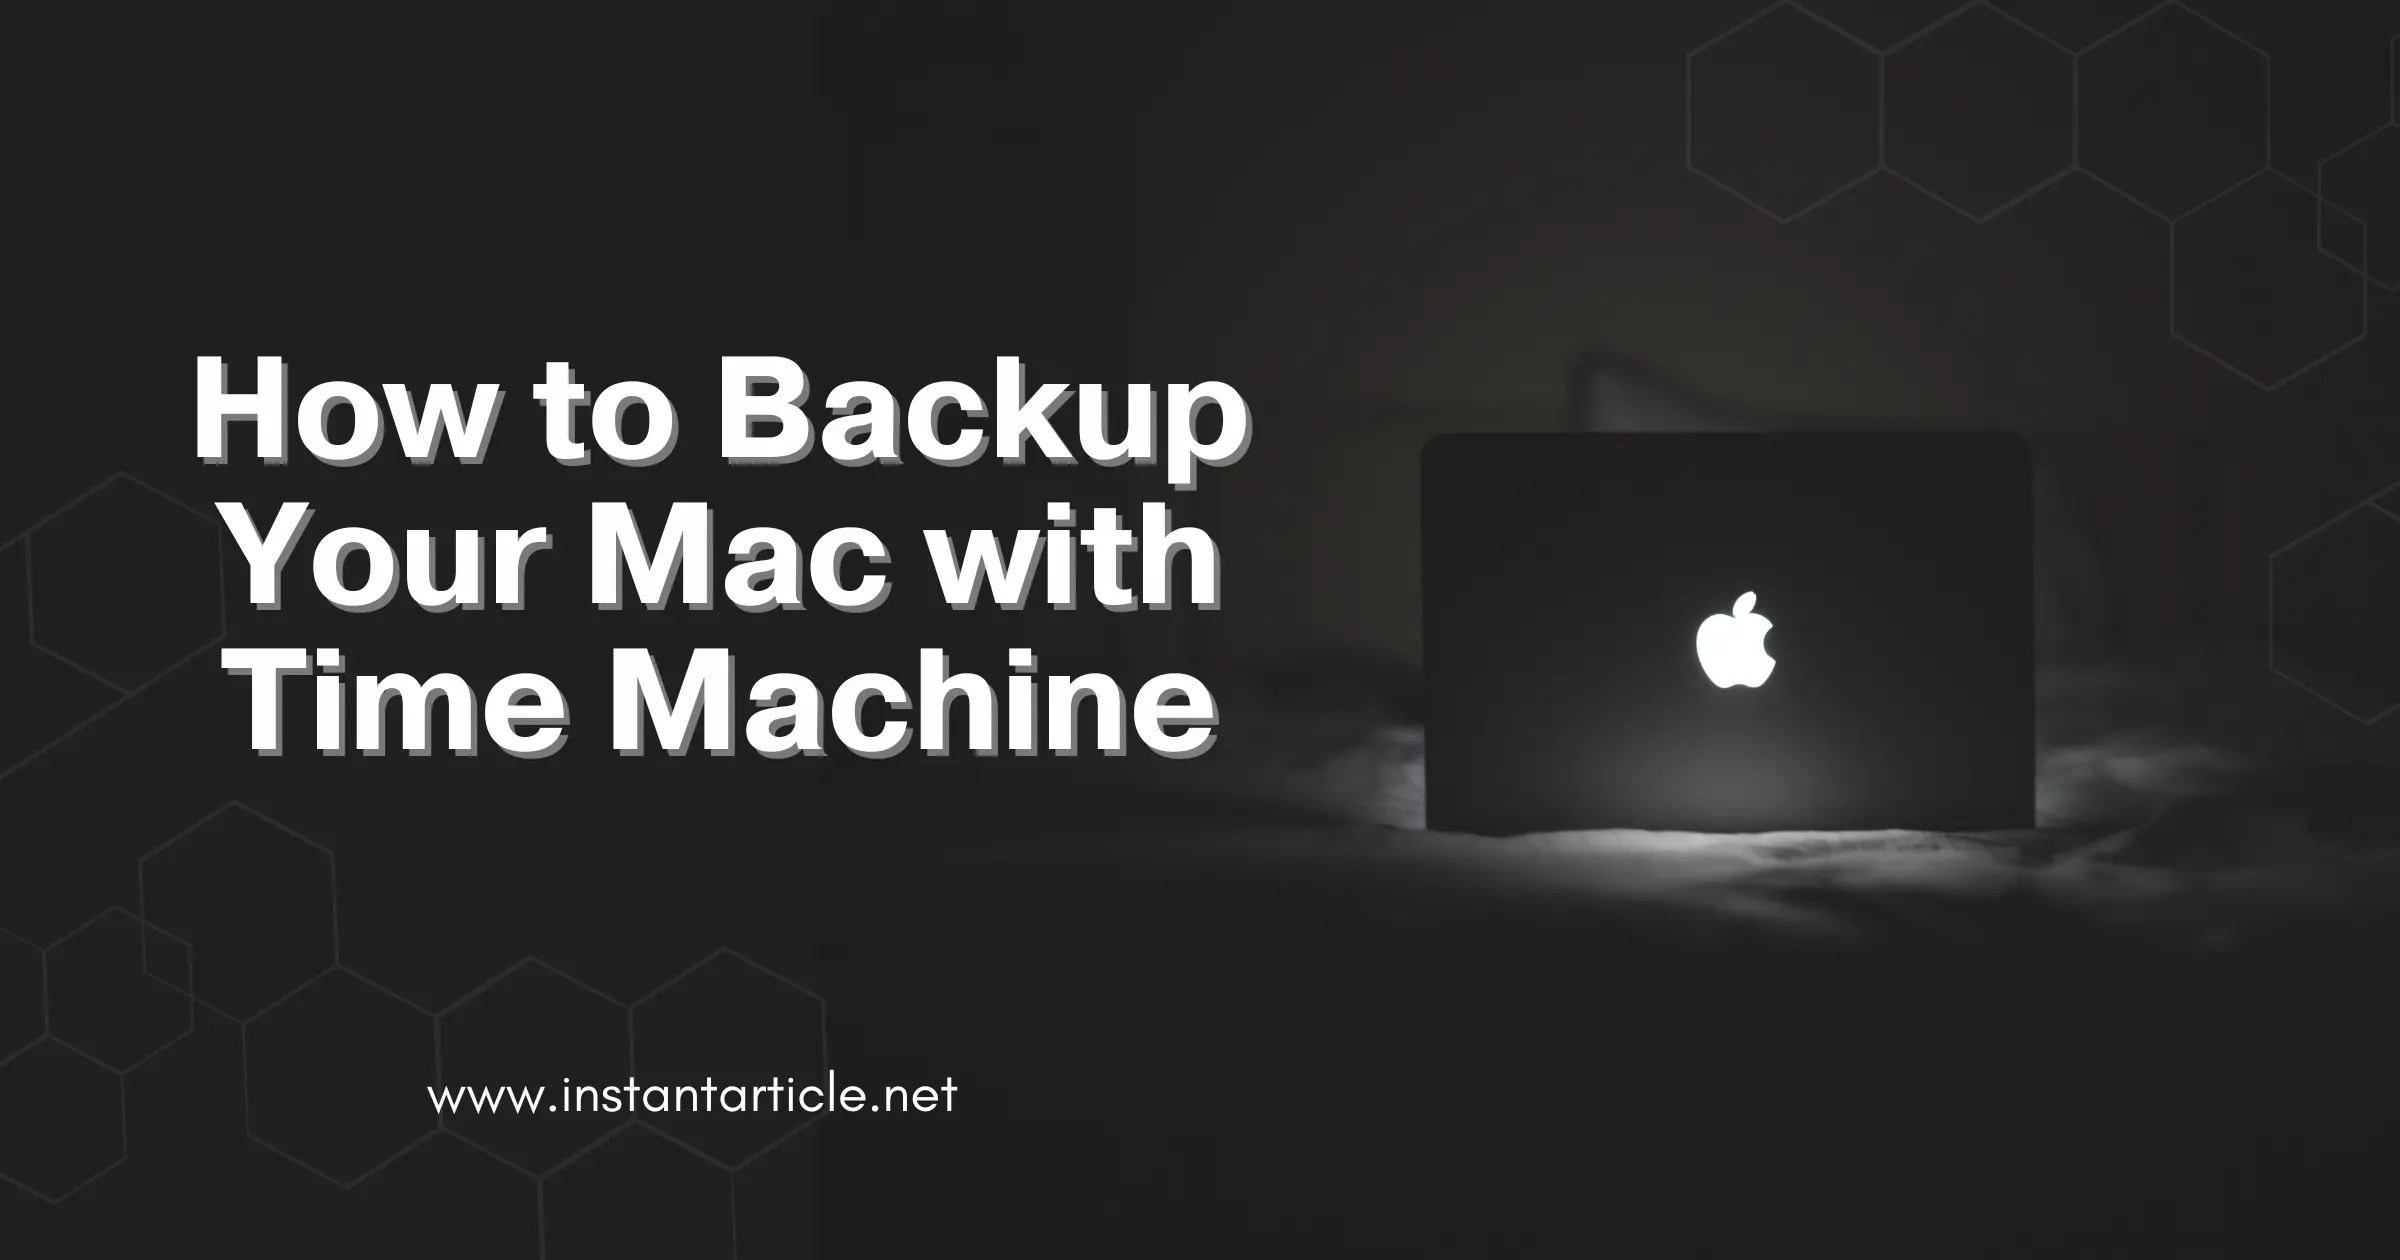 MacBook with Apple logo displaying the article title "How to Backup Your Mac with Time Machine" and the website URL instantarticle.net